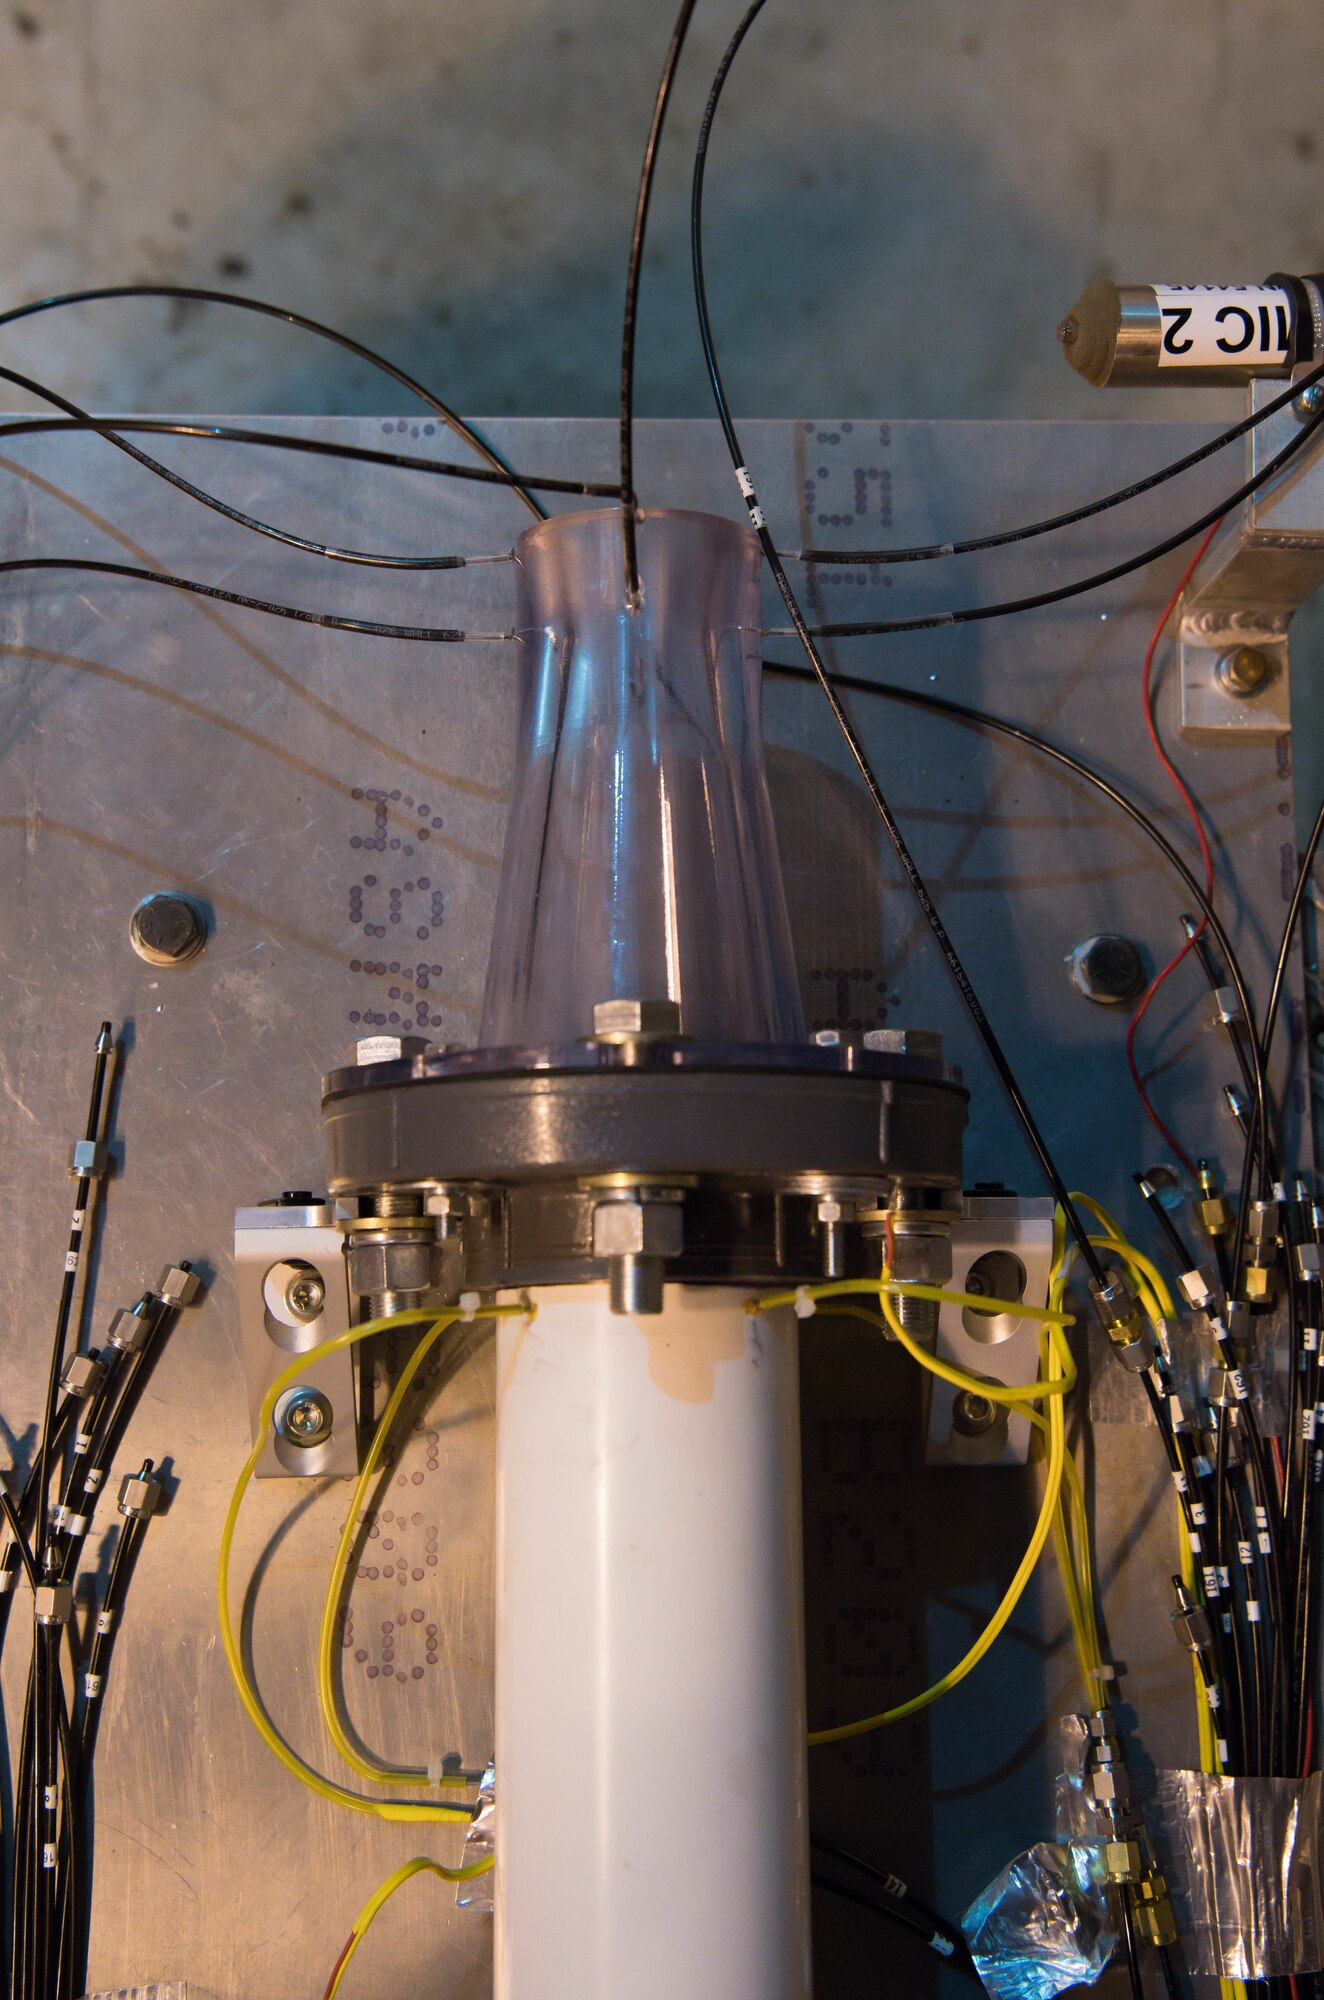 A nozzle is connected to a testing apparatus in the Sea Level 2 Test Cell, Dec. 17, 2020, at Arnold Air Force Base, Tenn. An Arnold Engineering Development Complex Propulsion Test Branch test team was investigating acoustic properties of the nozzle. (U.S. Air Force photo by Jill Pickett)